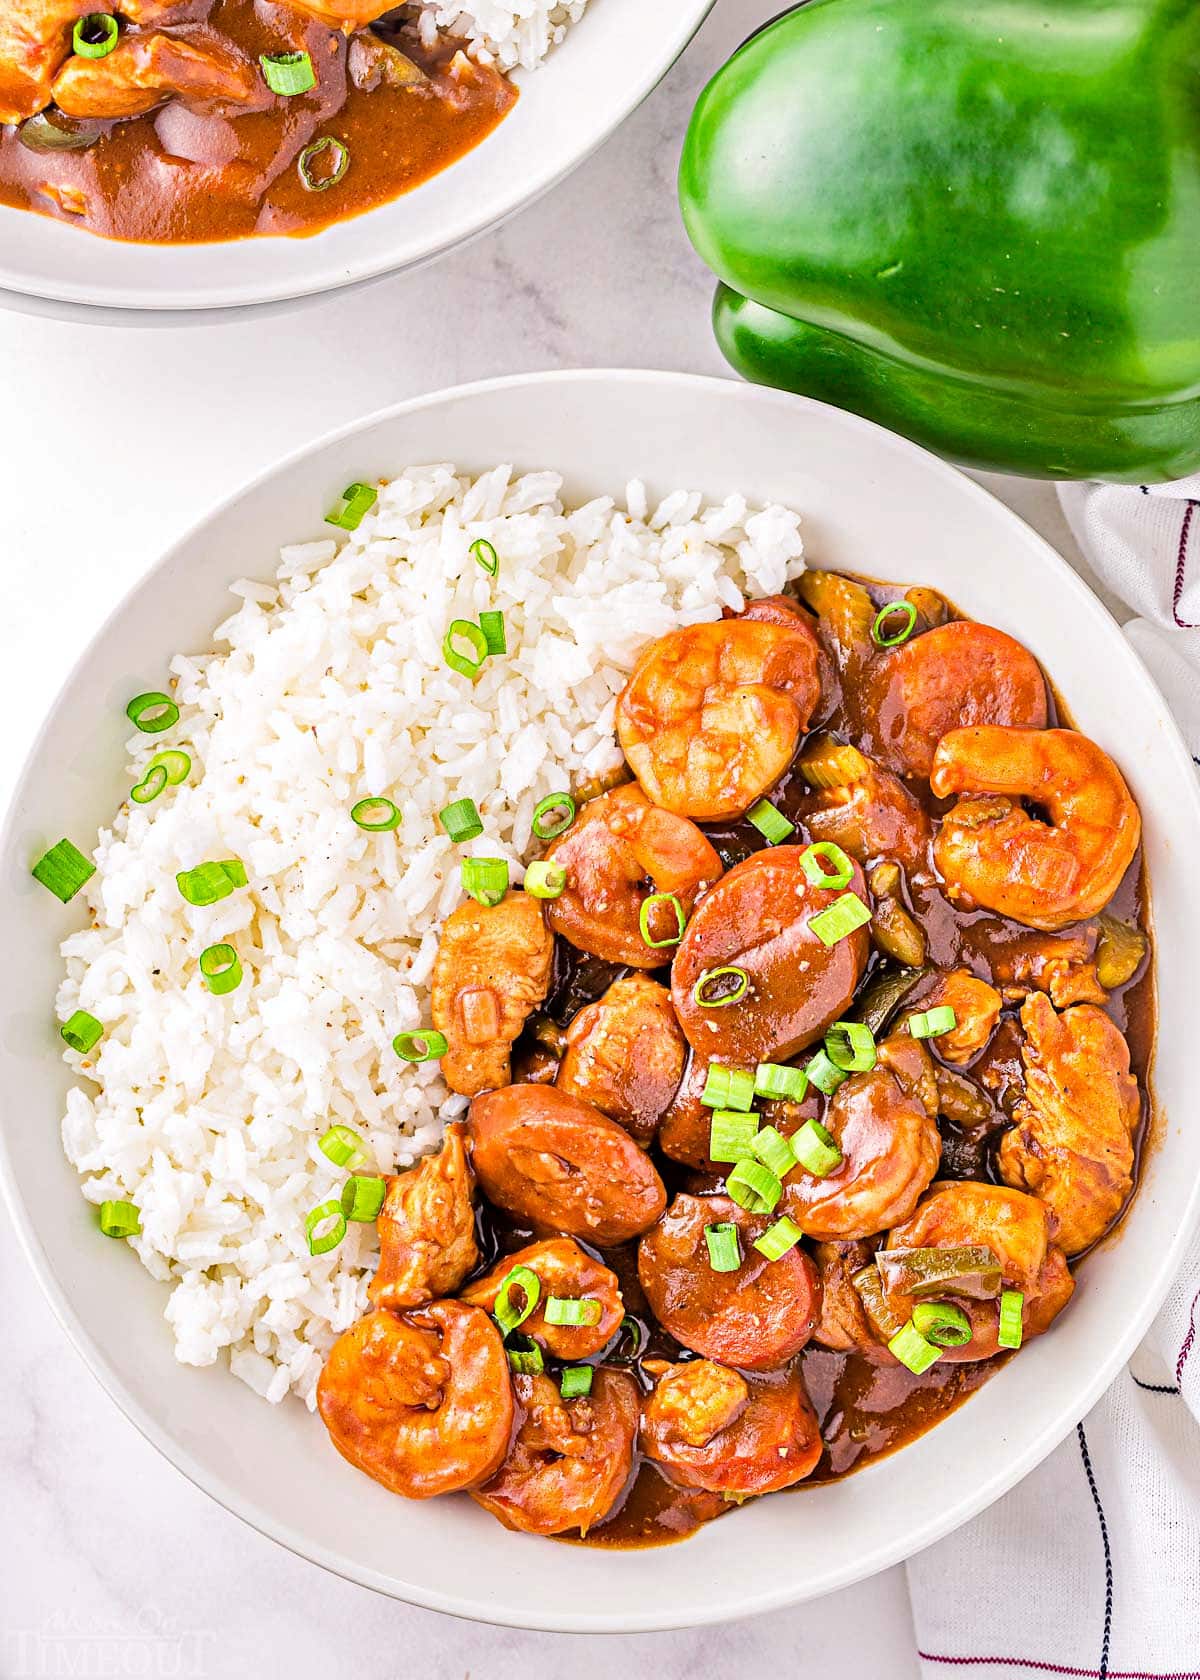 top down view of seafood gumbo served on a white plate with white rice and topped with green onions. part of another plate and a green pepper can be seen.